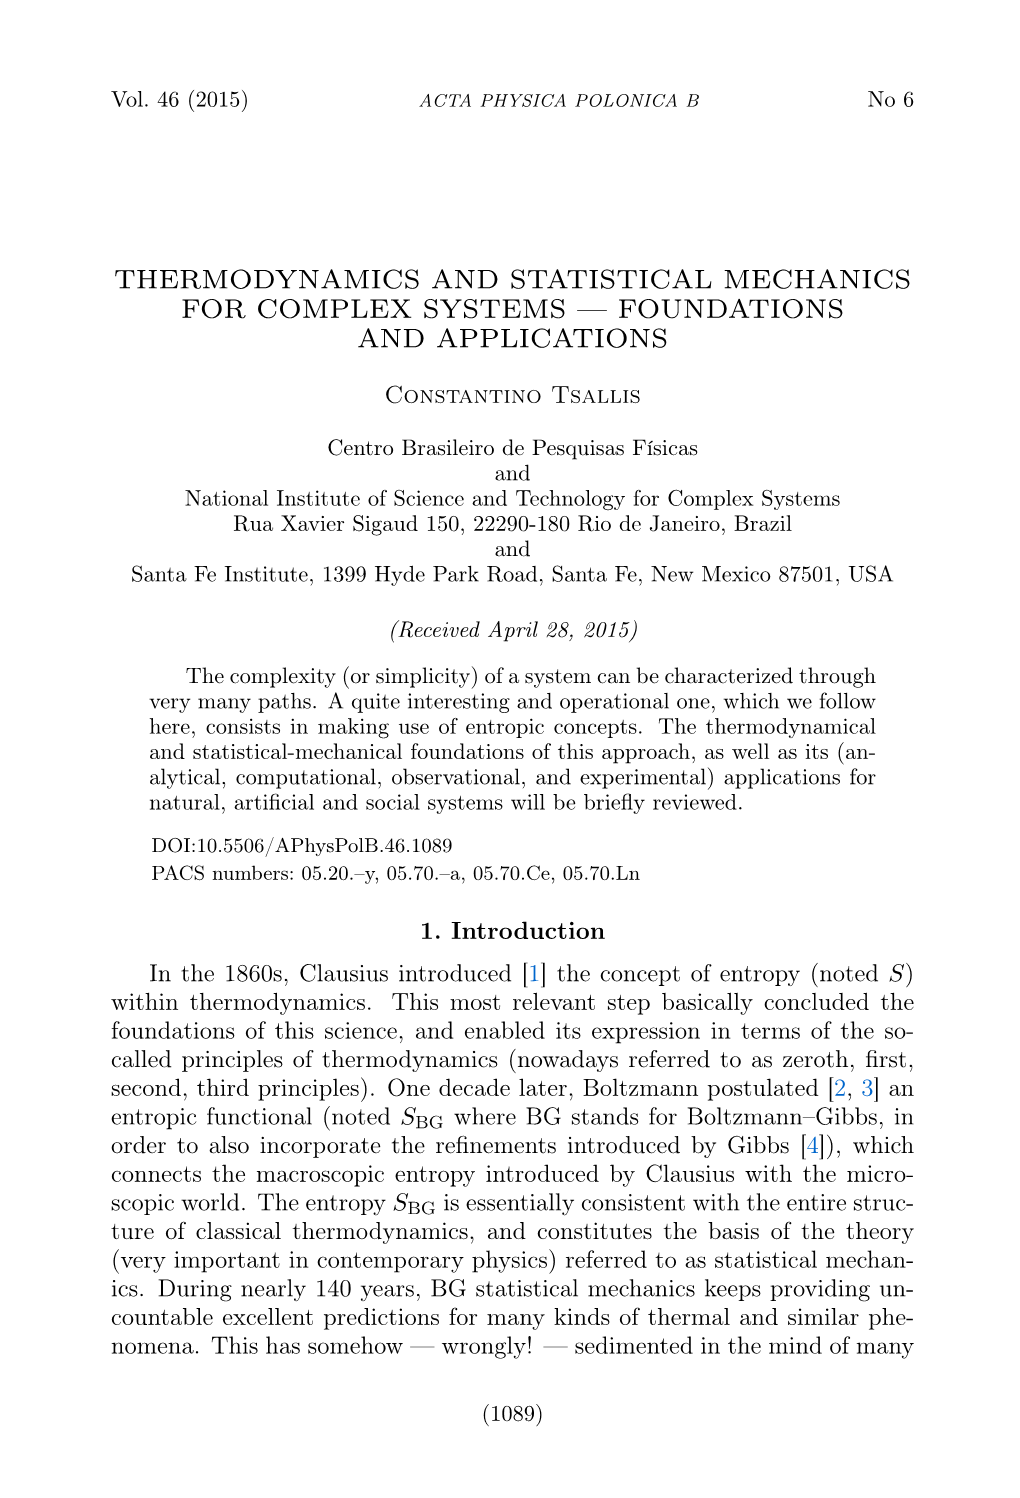 Thermodynamics and Statistical Mechanics for Complex Systems — Foundations and Applications